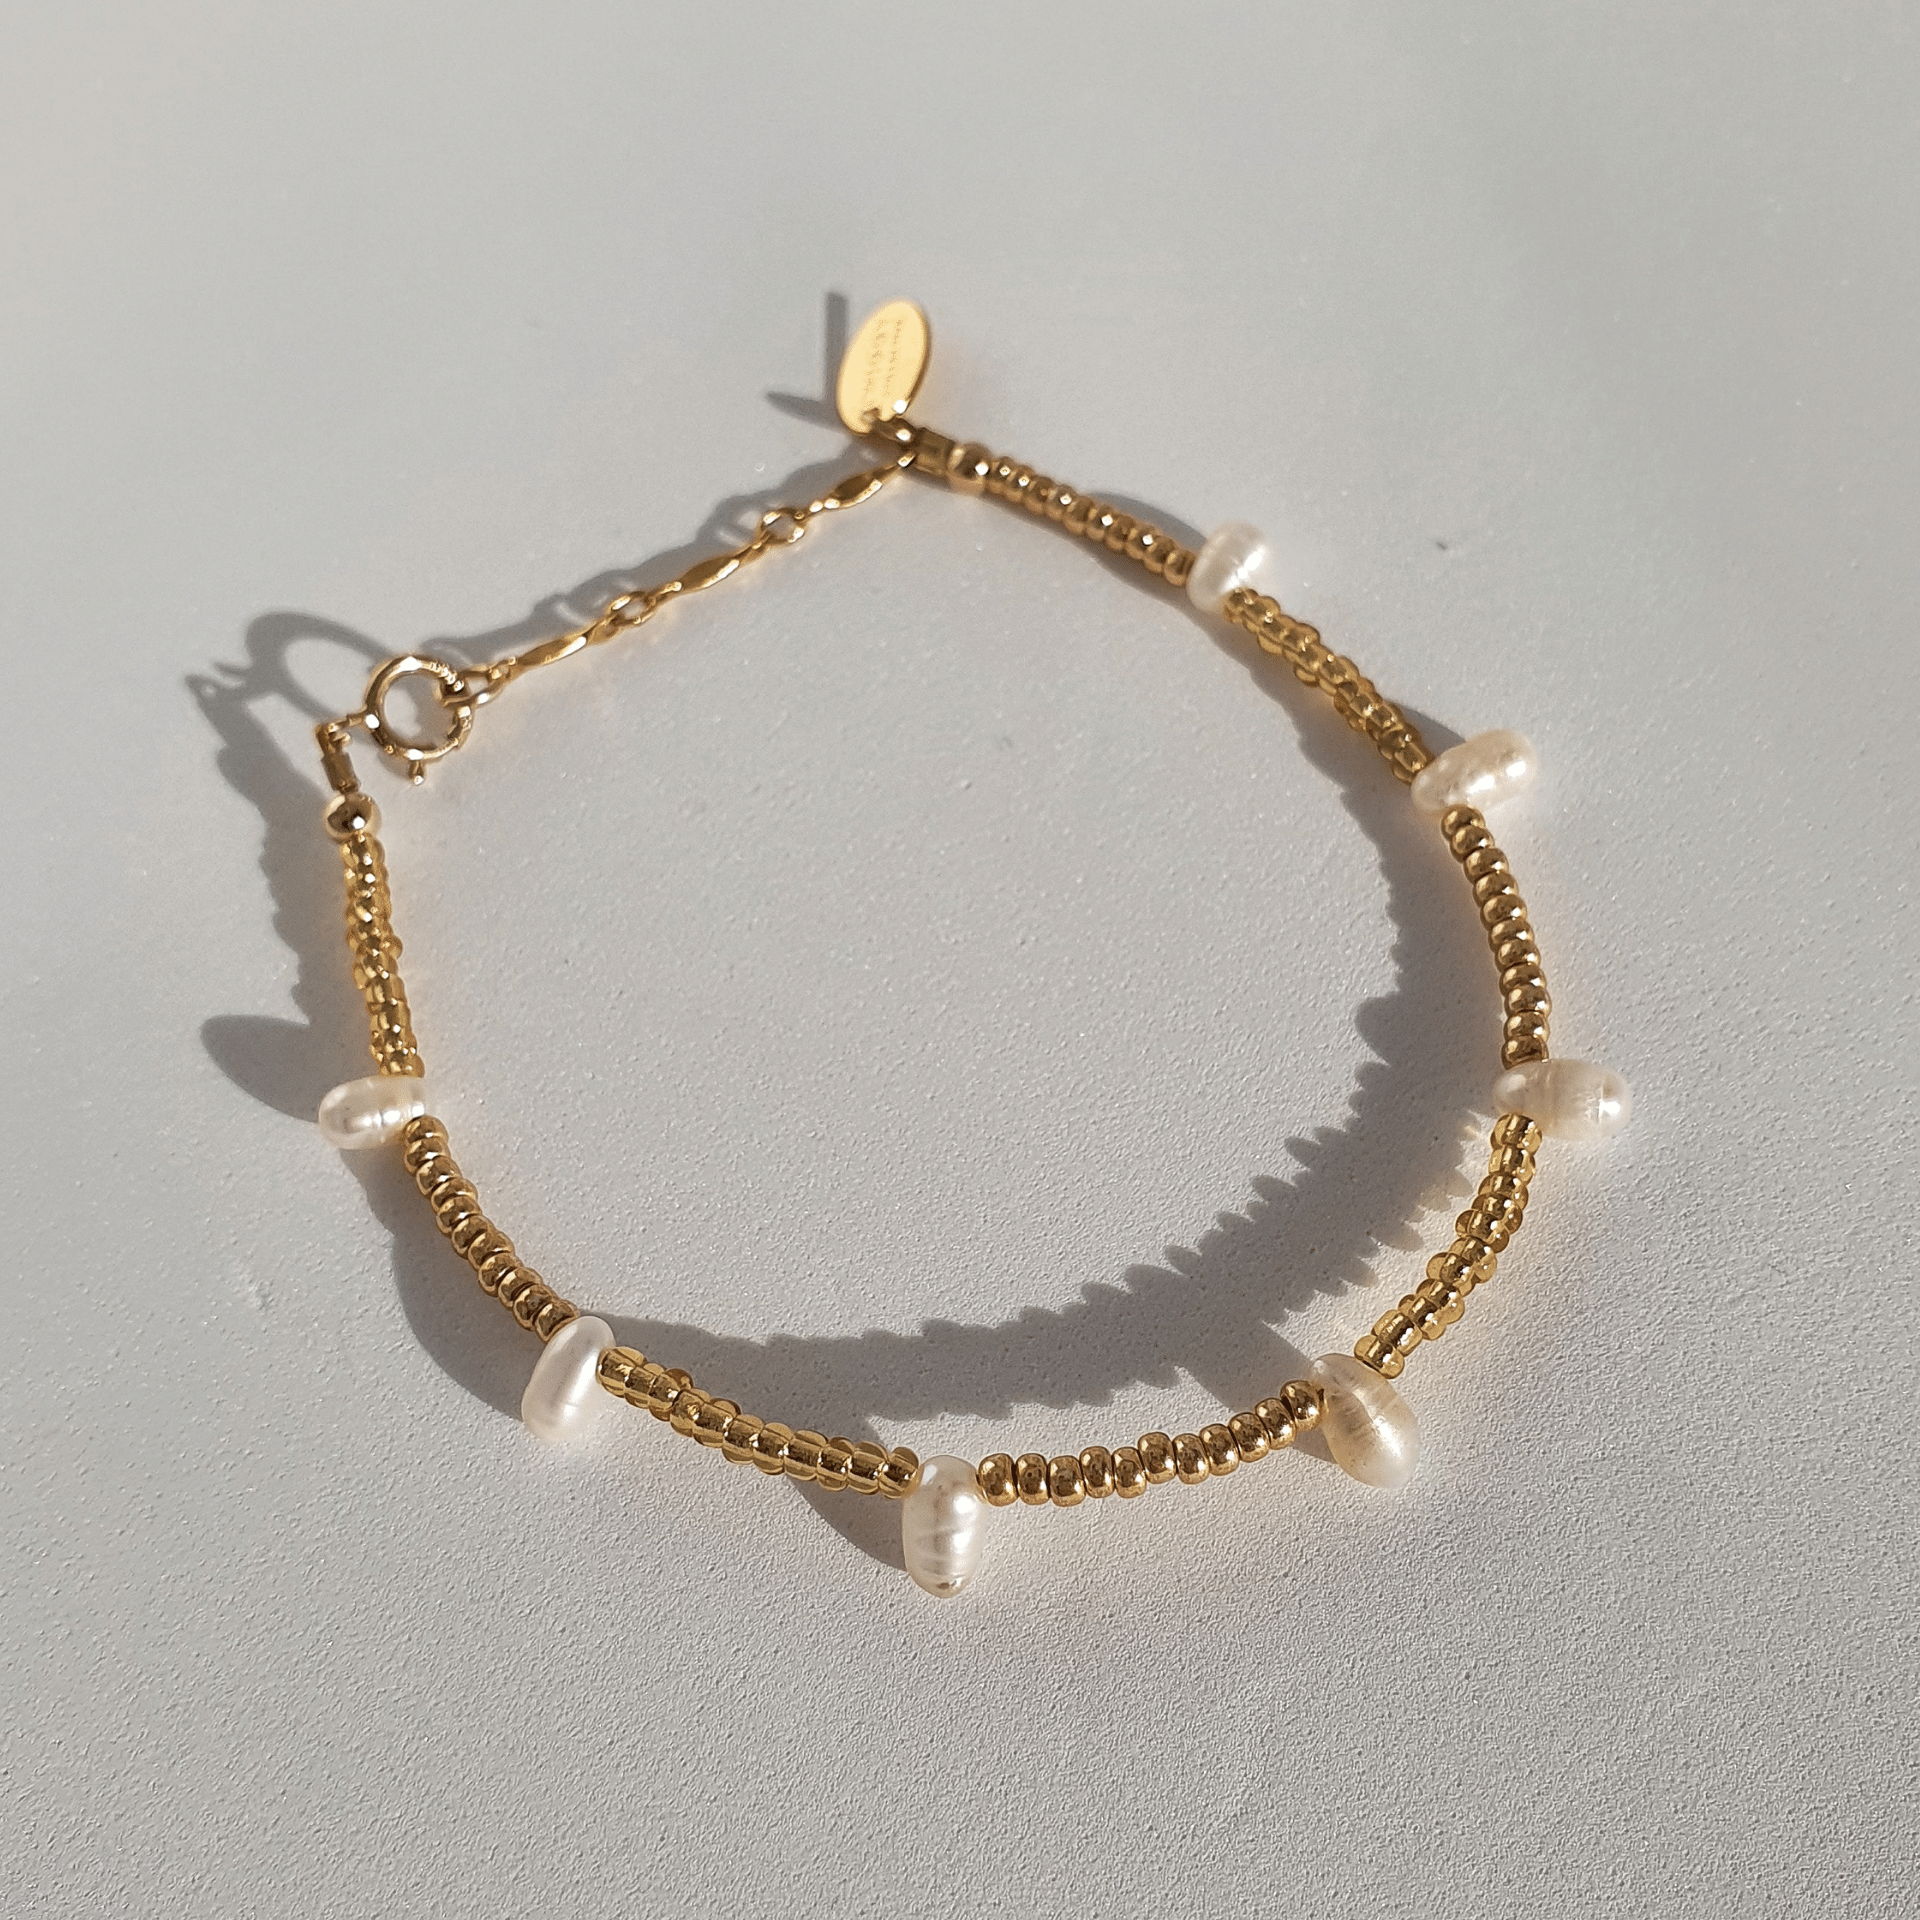 Designed with freshwater pearls, glass seed beads and 14Kt gold-filled beads. A dainty decorative piece - wear on its own for an elegant, feminine feel, or stack it alongside other designs to amp up the look.